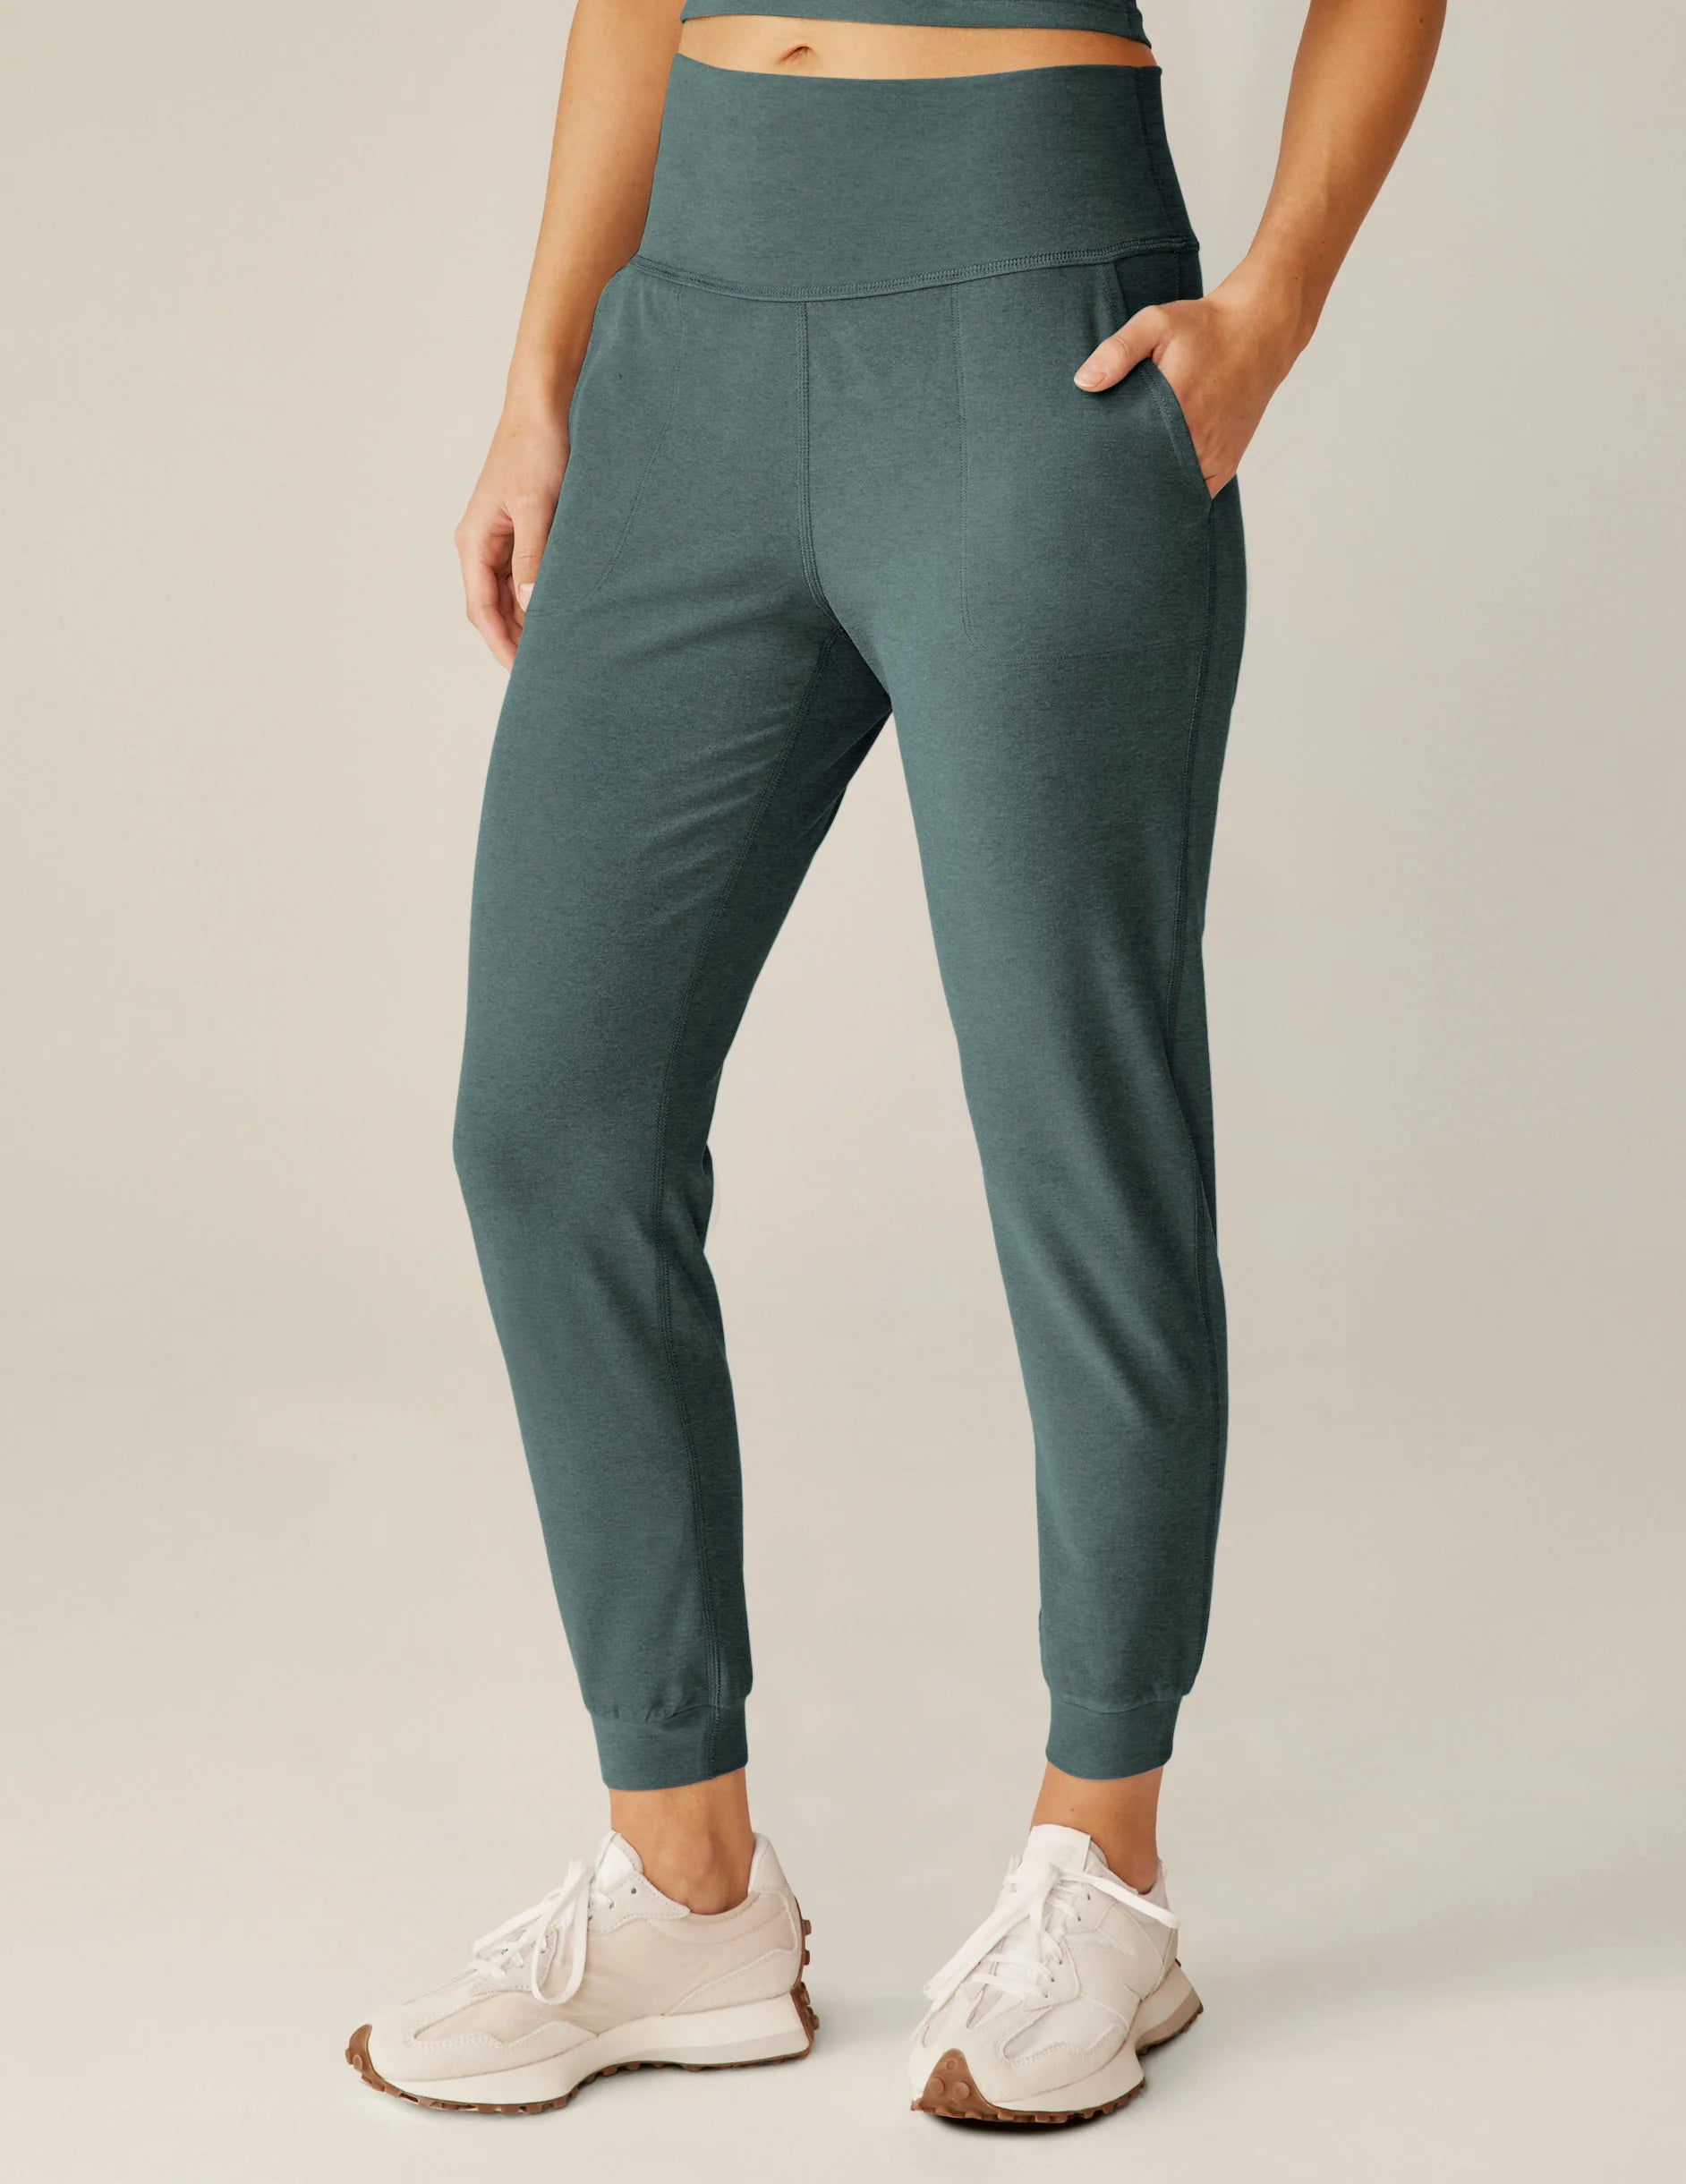 Yoga Joggers and Sweatpants for Women, 50+ Brands